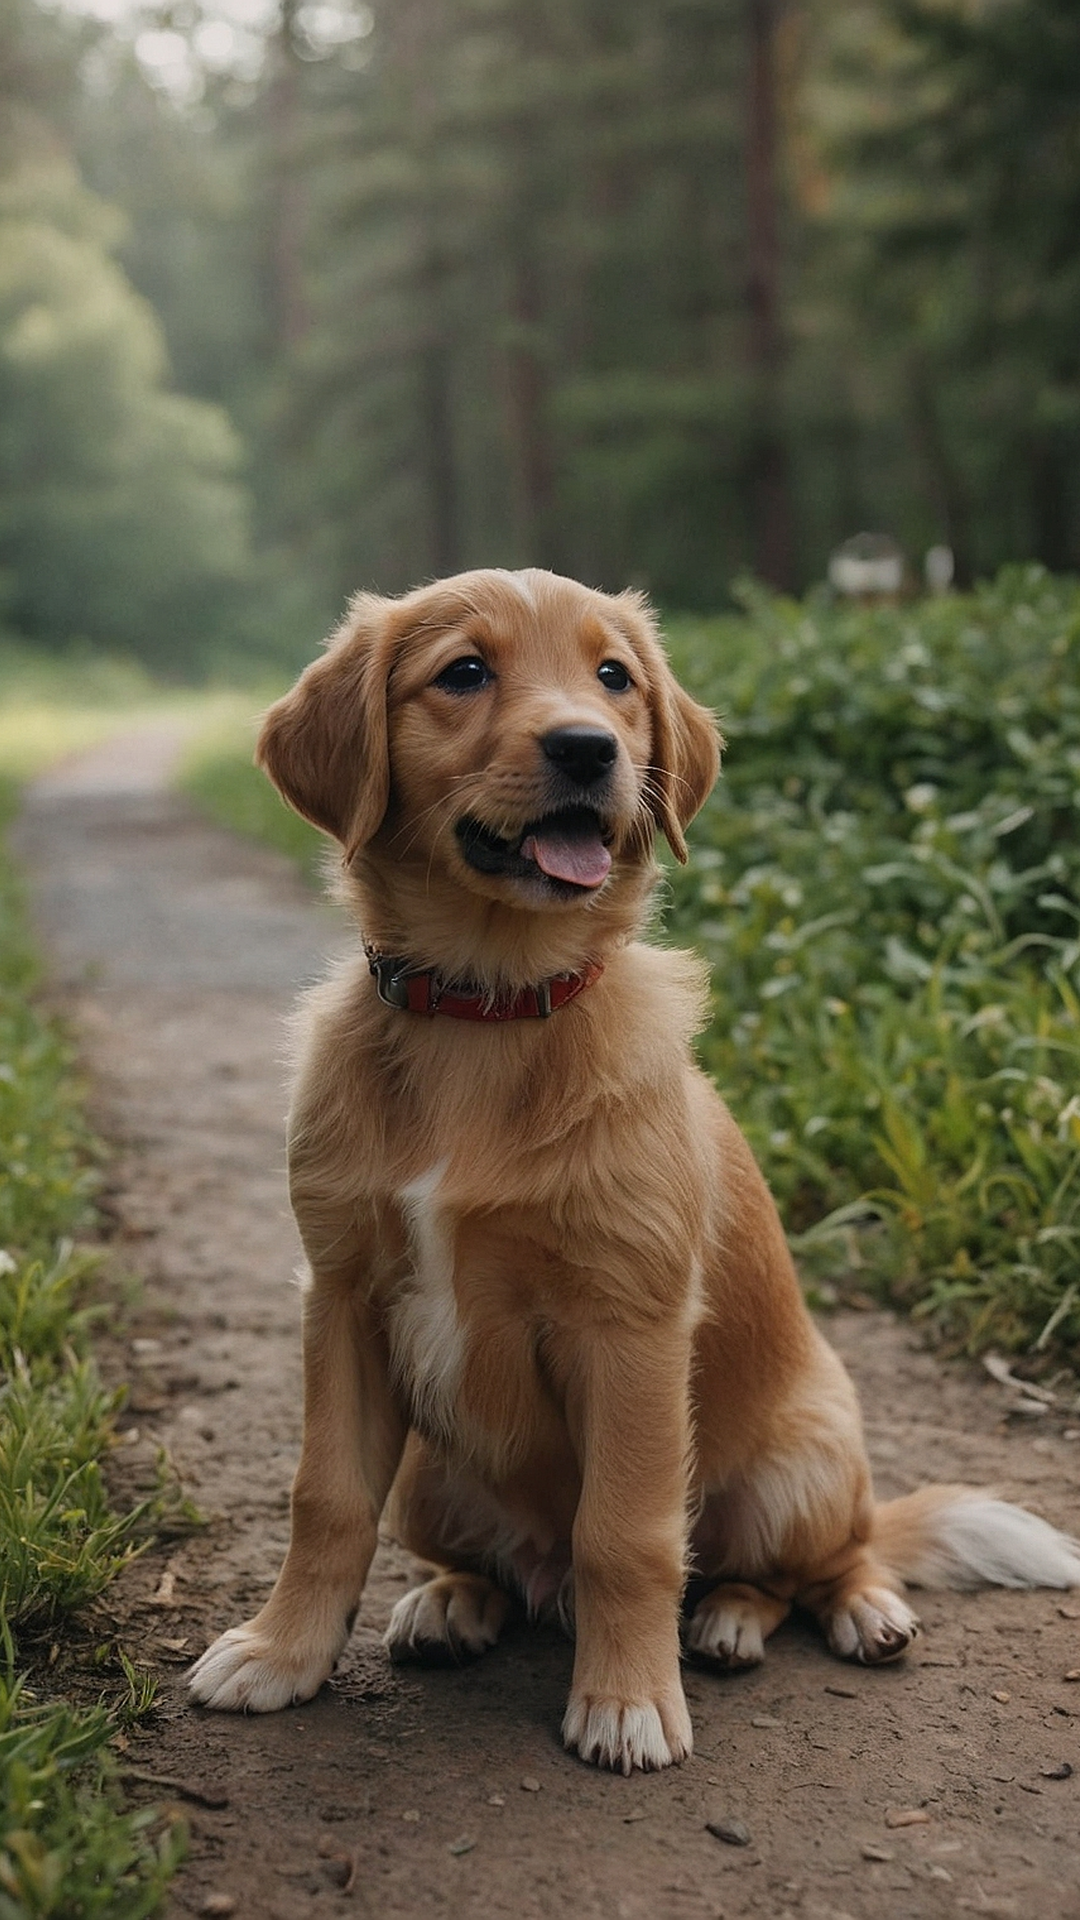 Happy Tails: Joyful Images of Cute Puppies